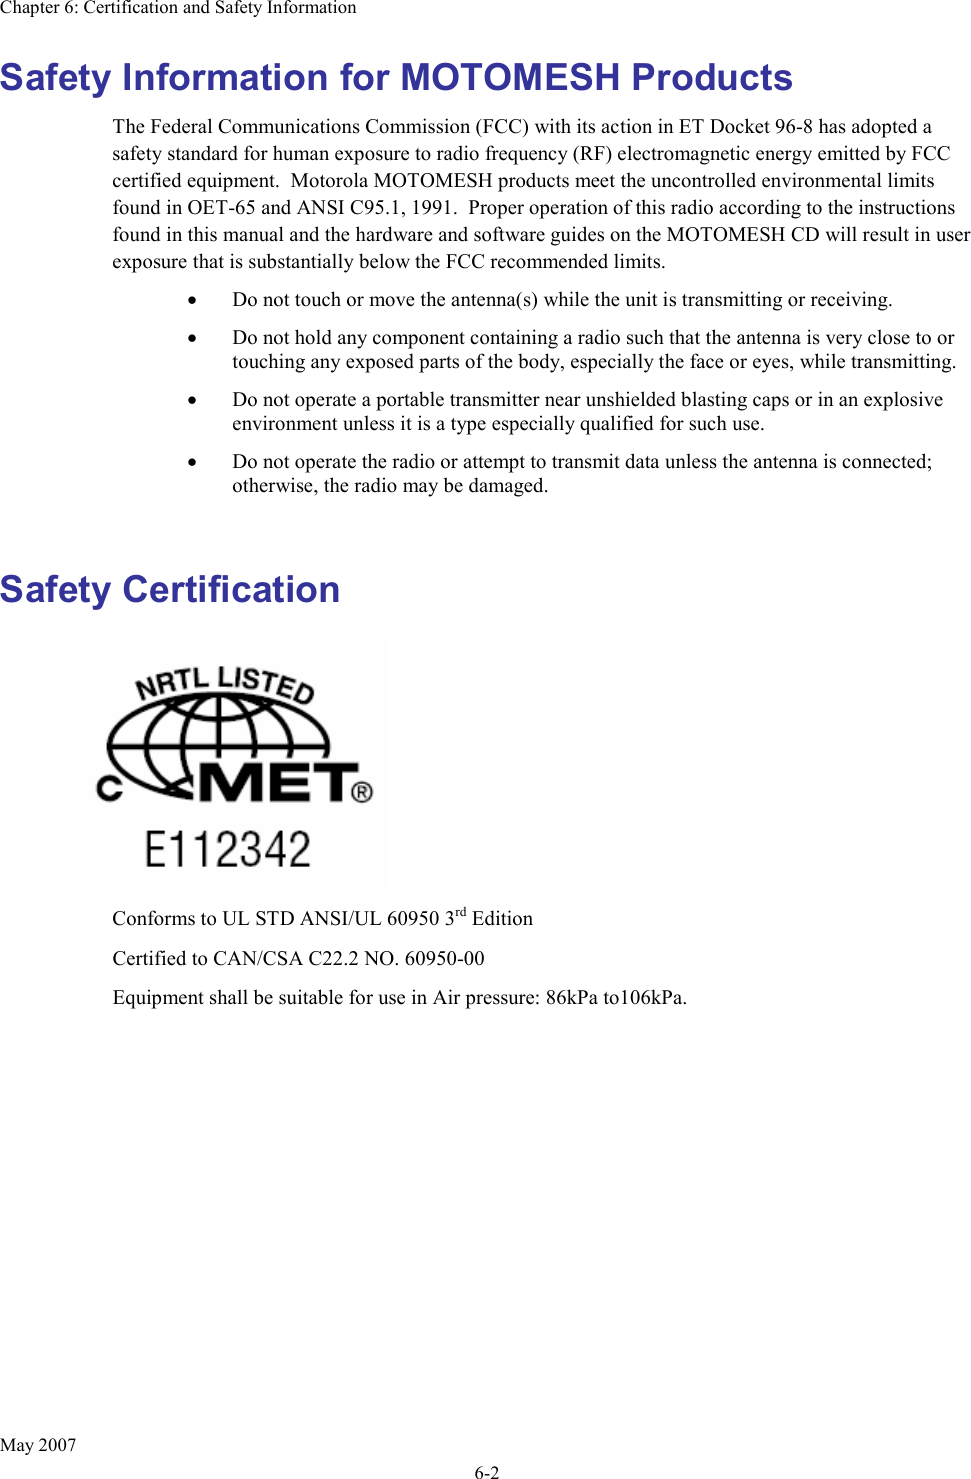 Chapter 6: Certification and Safety Information May 2007 6-2 Safety Information for MOTOMESH Products The Federal Communications Commission (FCC) with its action in ET Docket 96-8 has adopted a safety standard for human exposure to radio frequency (RF) electromagnetic energy emitted by FCC certified equipment.  Motorola MOTOMESH products meet the uncontrolled environmental limits found in OET-65 and ANSI C95.1, 1991.  Proper operation of this radio according to the instructions found in this manual and the hardware and software guides on the MOTOMESH CD will result in user exposure that is substantially below the FCC recommended limits.  • Do not touch or move the antenna(s) while the unit is transmitting or receiving. • Do not hold any component containing a radio such that the antenna is very close to or touching any exposed parts of the body, especially the face or eyes, while transmitting. • Do not operate a portable transmitter near unshielded blasting caps or in an explosive environment unless it is a type especially qualified for such use. • Do not operate the radio or attempt to transmit data unless the antenna is connected; otherwise, the radio may be damaged.  Safety Certification    Conforms to UL STD ANSI/UL 60950 3rd Edition  Certified to CAN/CSA C22.2 NO. 60950-00 Equipment shall be suitable for use in Air pressure: 86kPa to106kPa.  